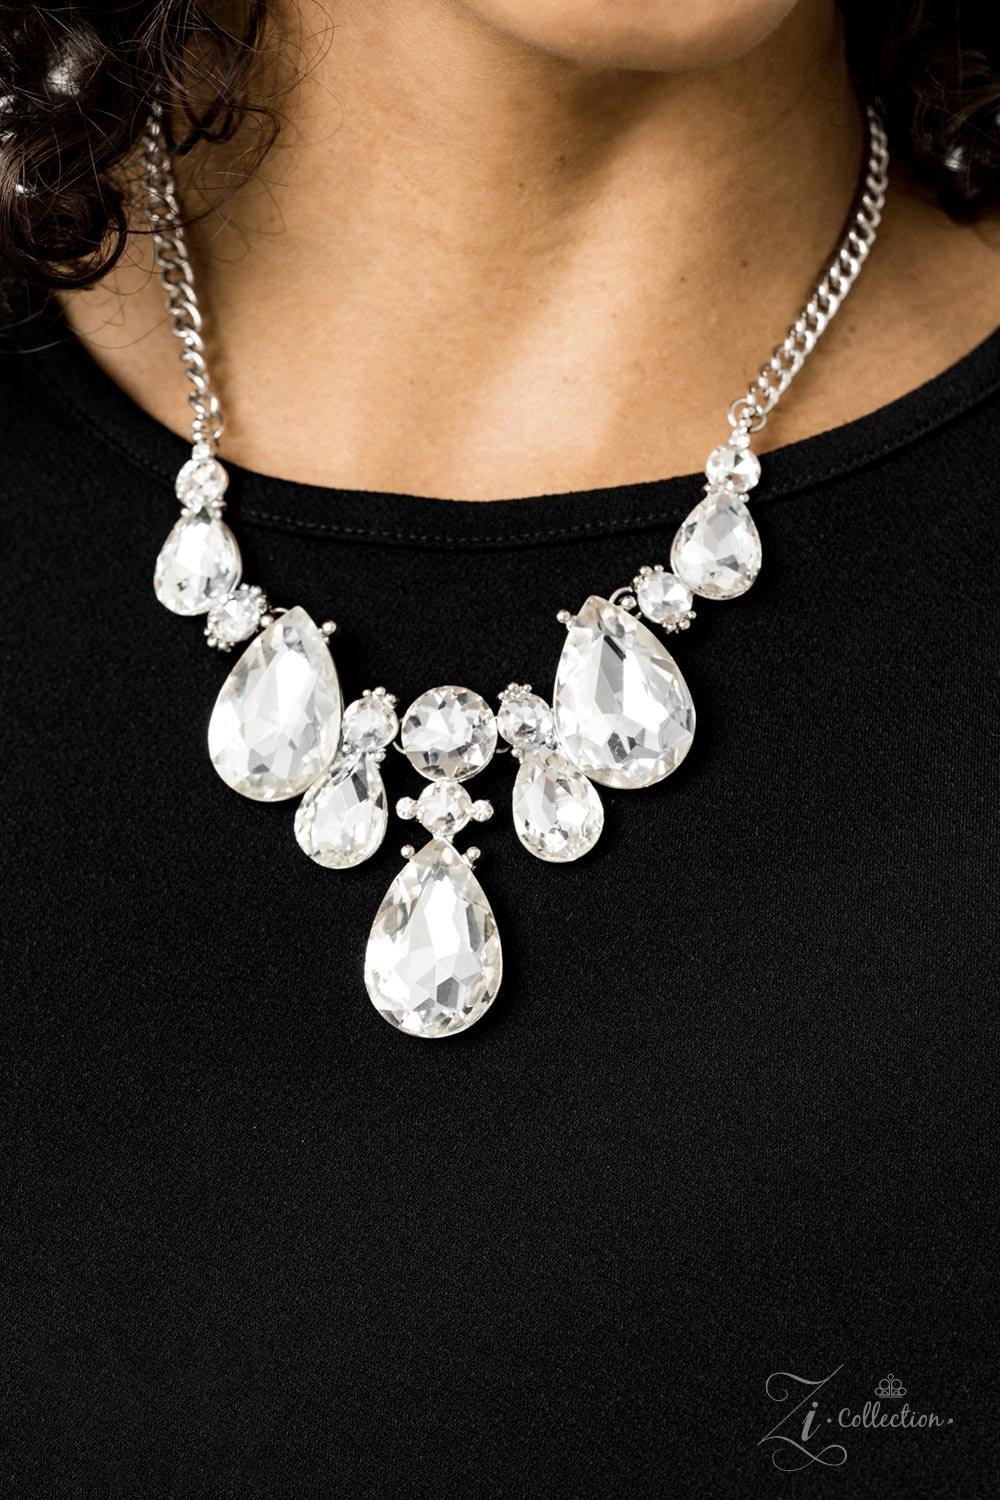 Paparazzi Accessories Reign Dramatic frames featuring tranquil teardrop and classic round white rhinestones delicately link below the collar for a showstopping look. A large teardrop rhinestone drips from the center, creating an unapologetic pendant that